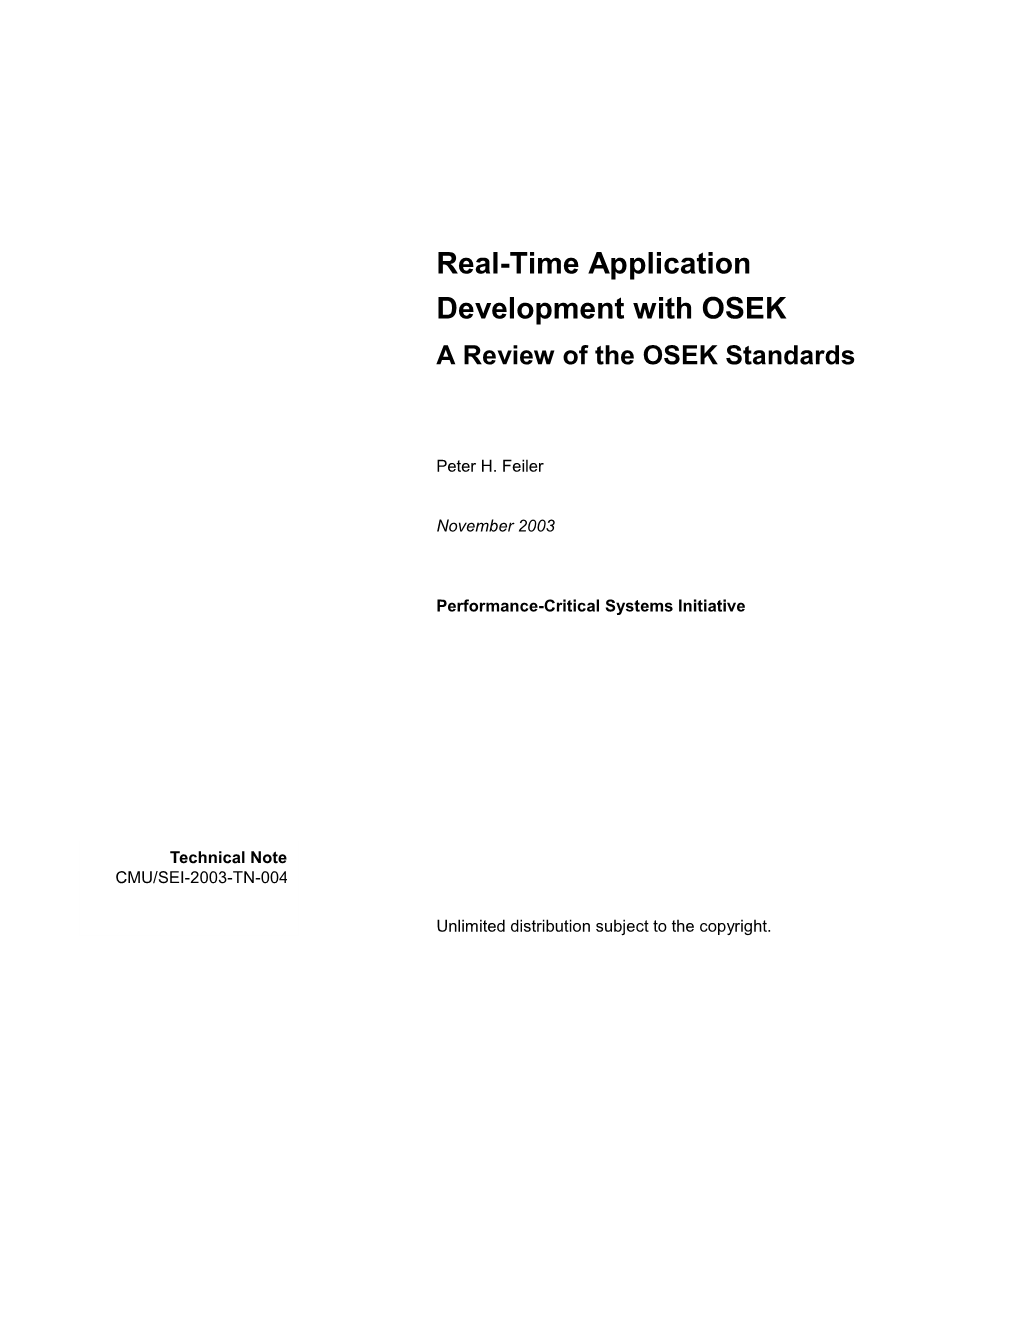 Real-Time Application Development with OSEK a Review of the OSEK Standards